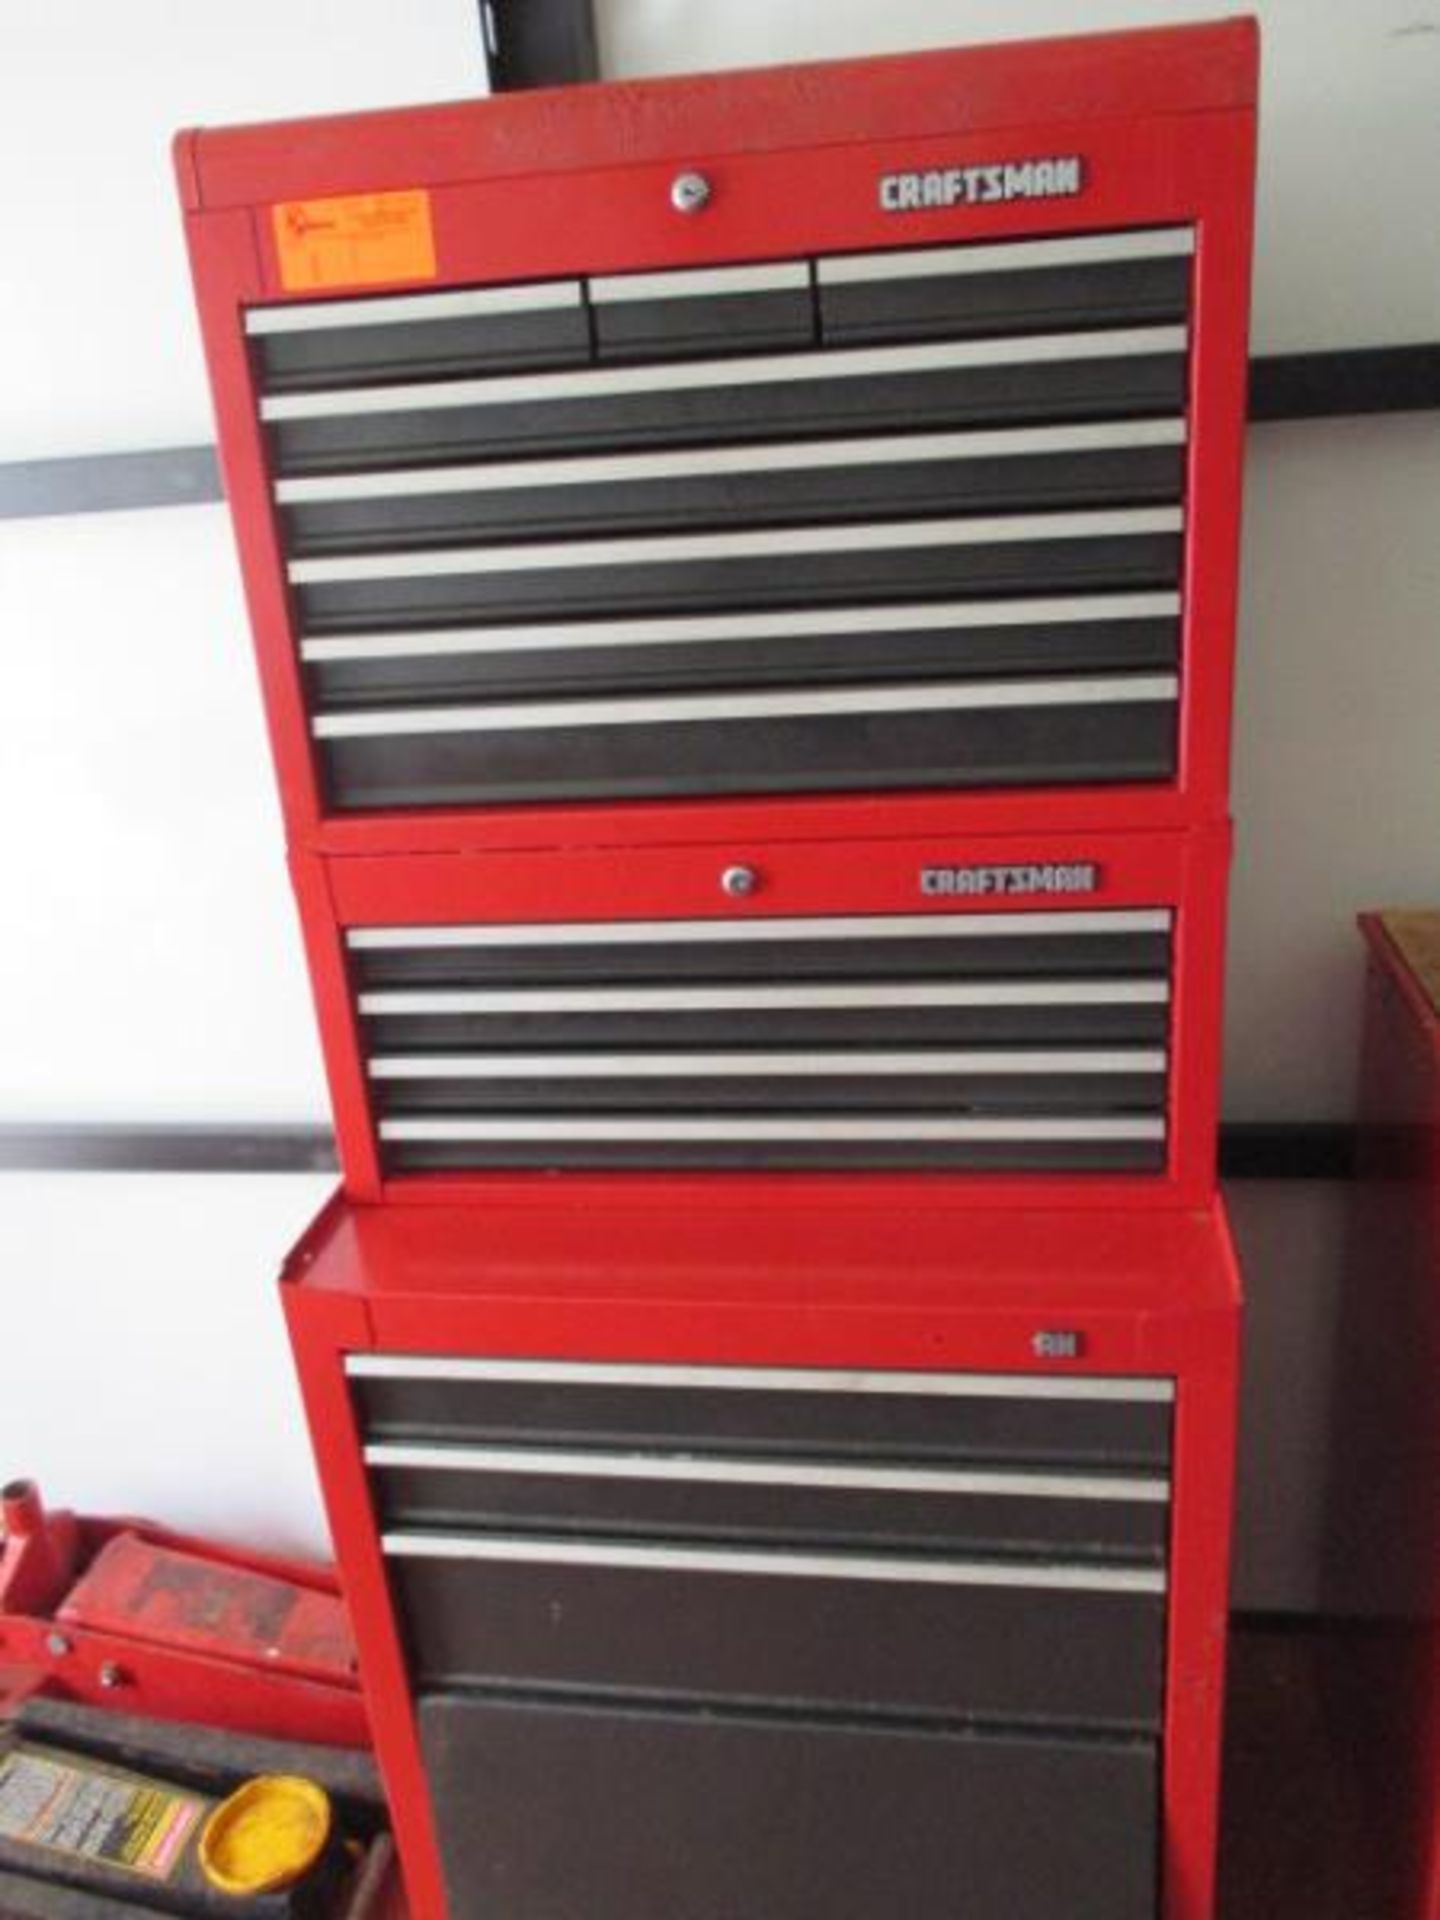 Craftsman Rolling Tool Box, Red, 3 Sections, 15 Drawers, Lower Lift Cover, Lift Top, Lockable w/